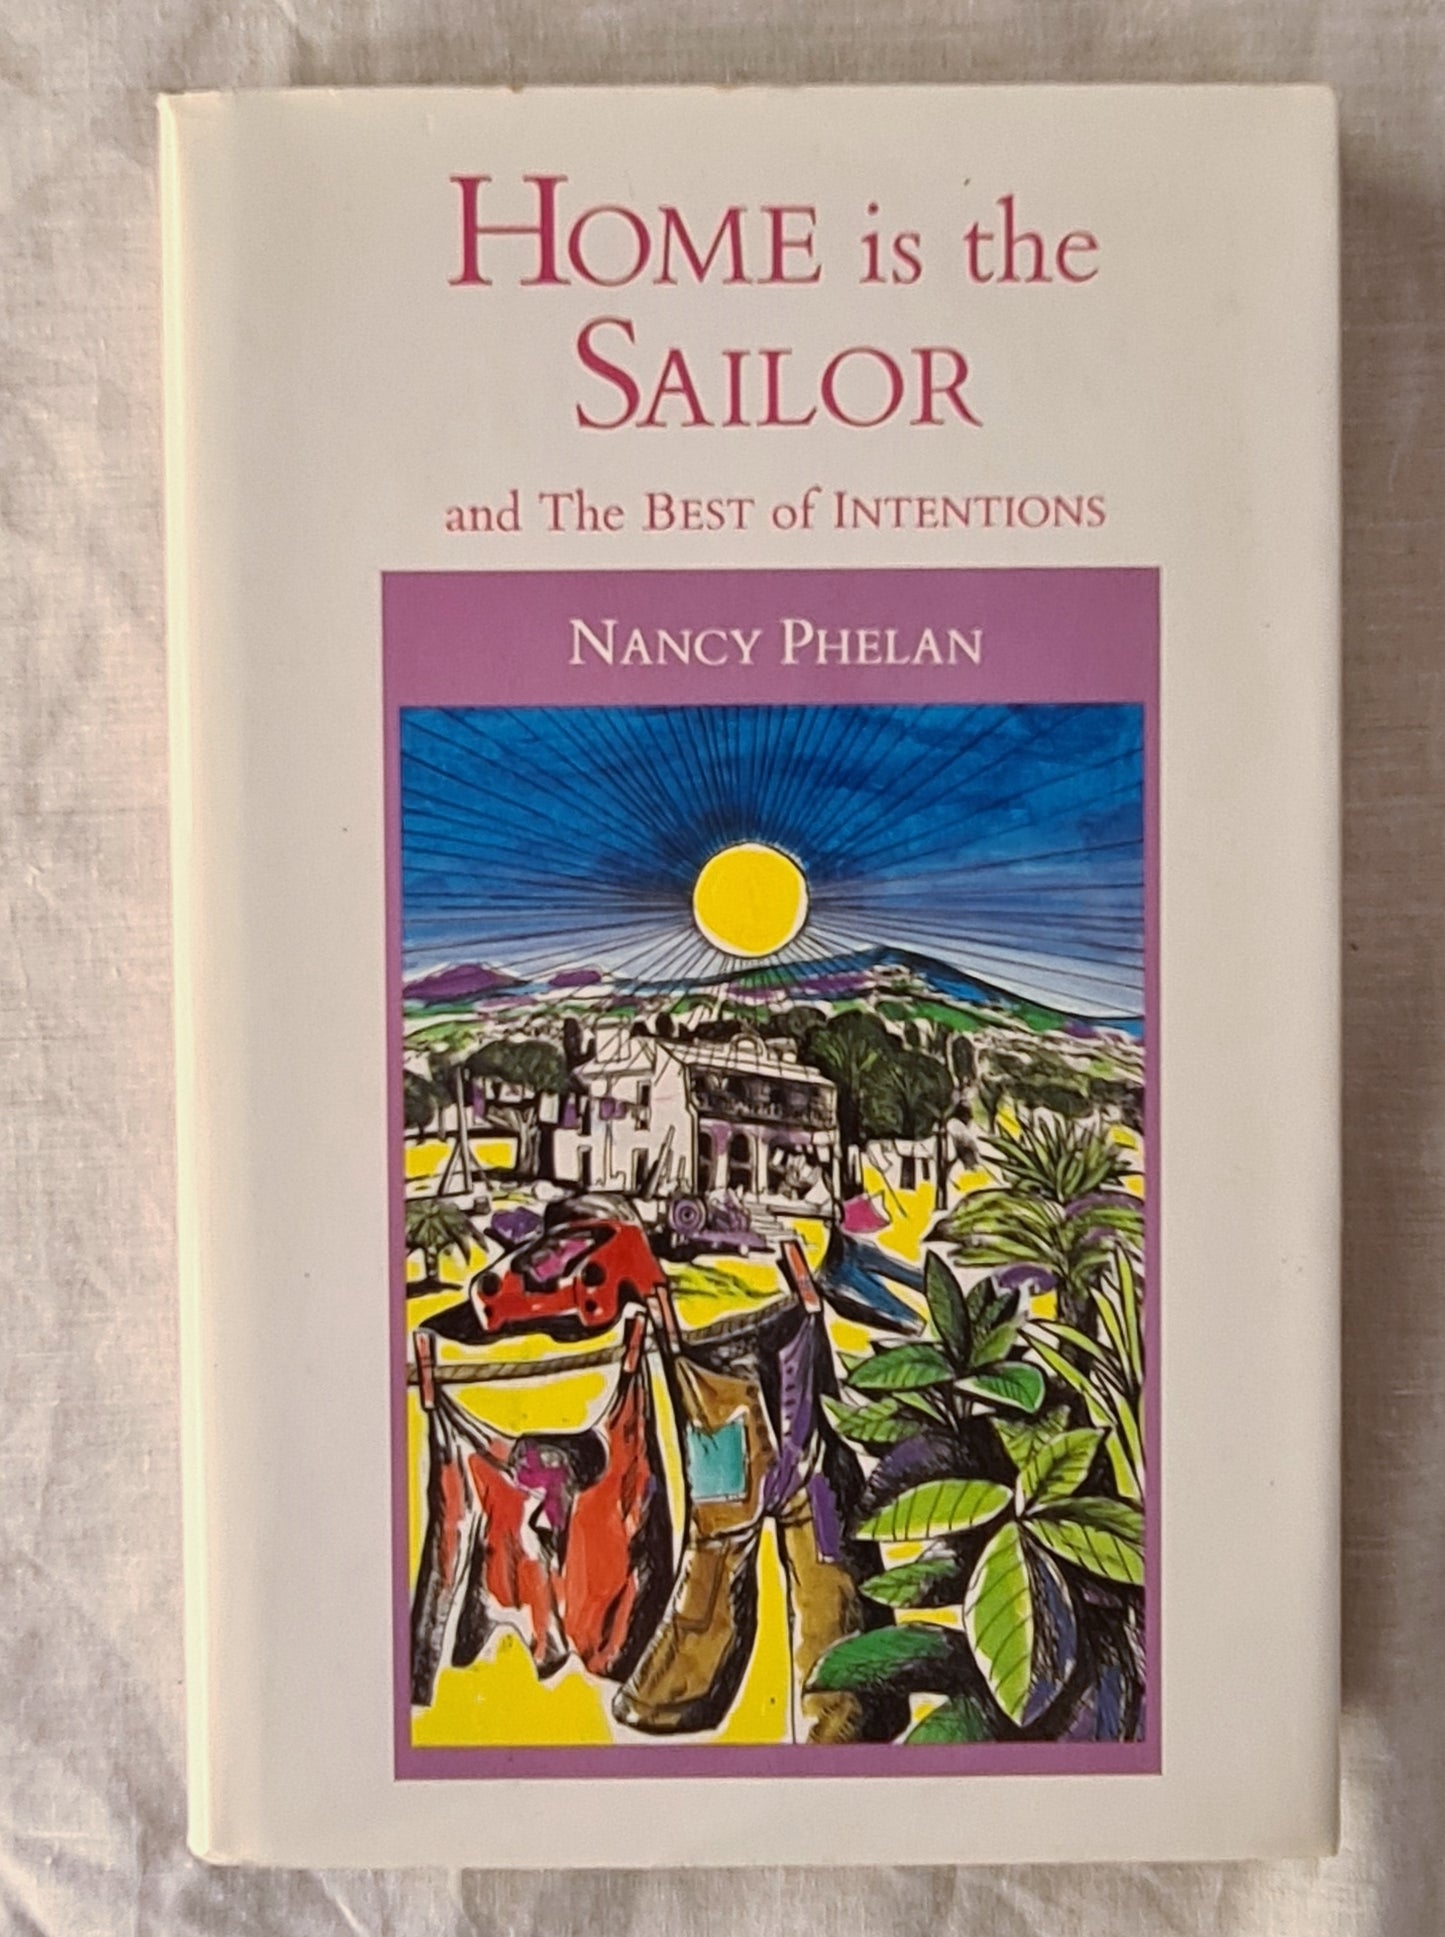 Home is the Sailor  and  The Best of Intentions  by Nancy Phelan